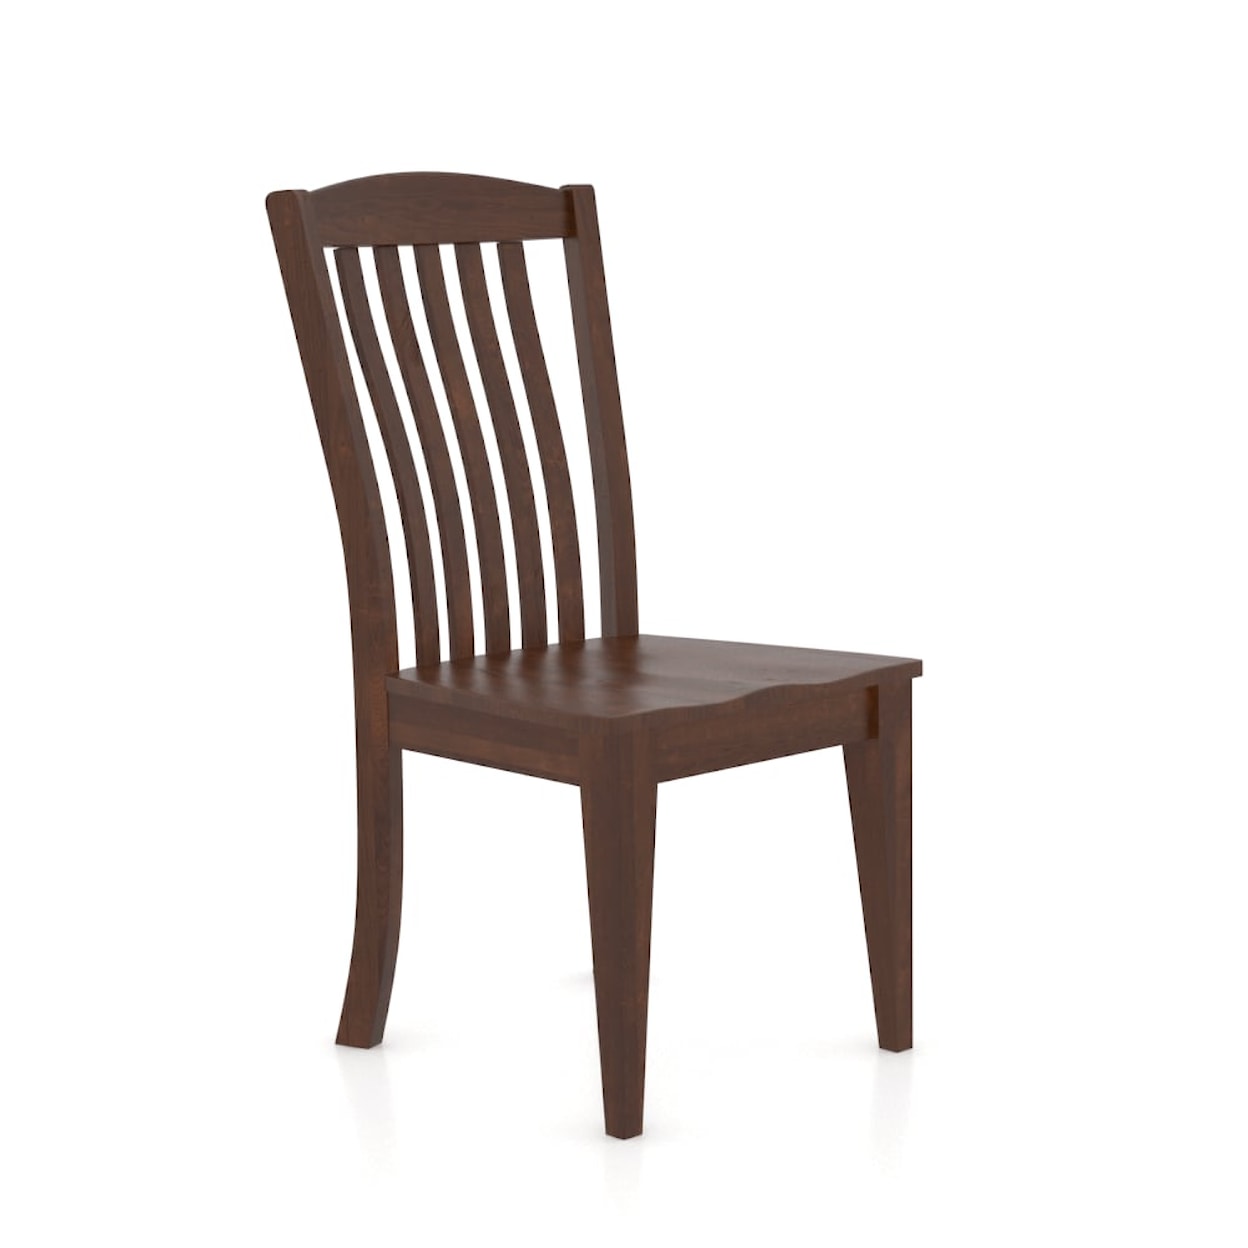 Canadel Gourmet Customizable Dining Chair